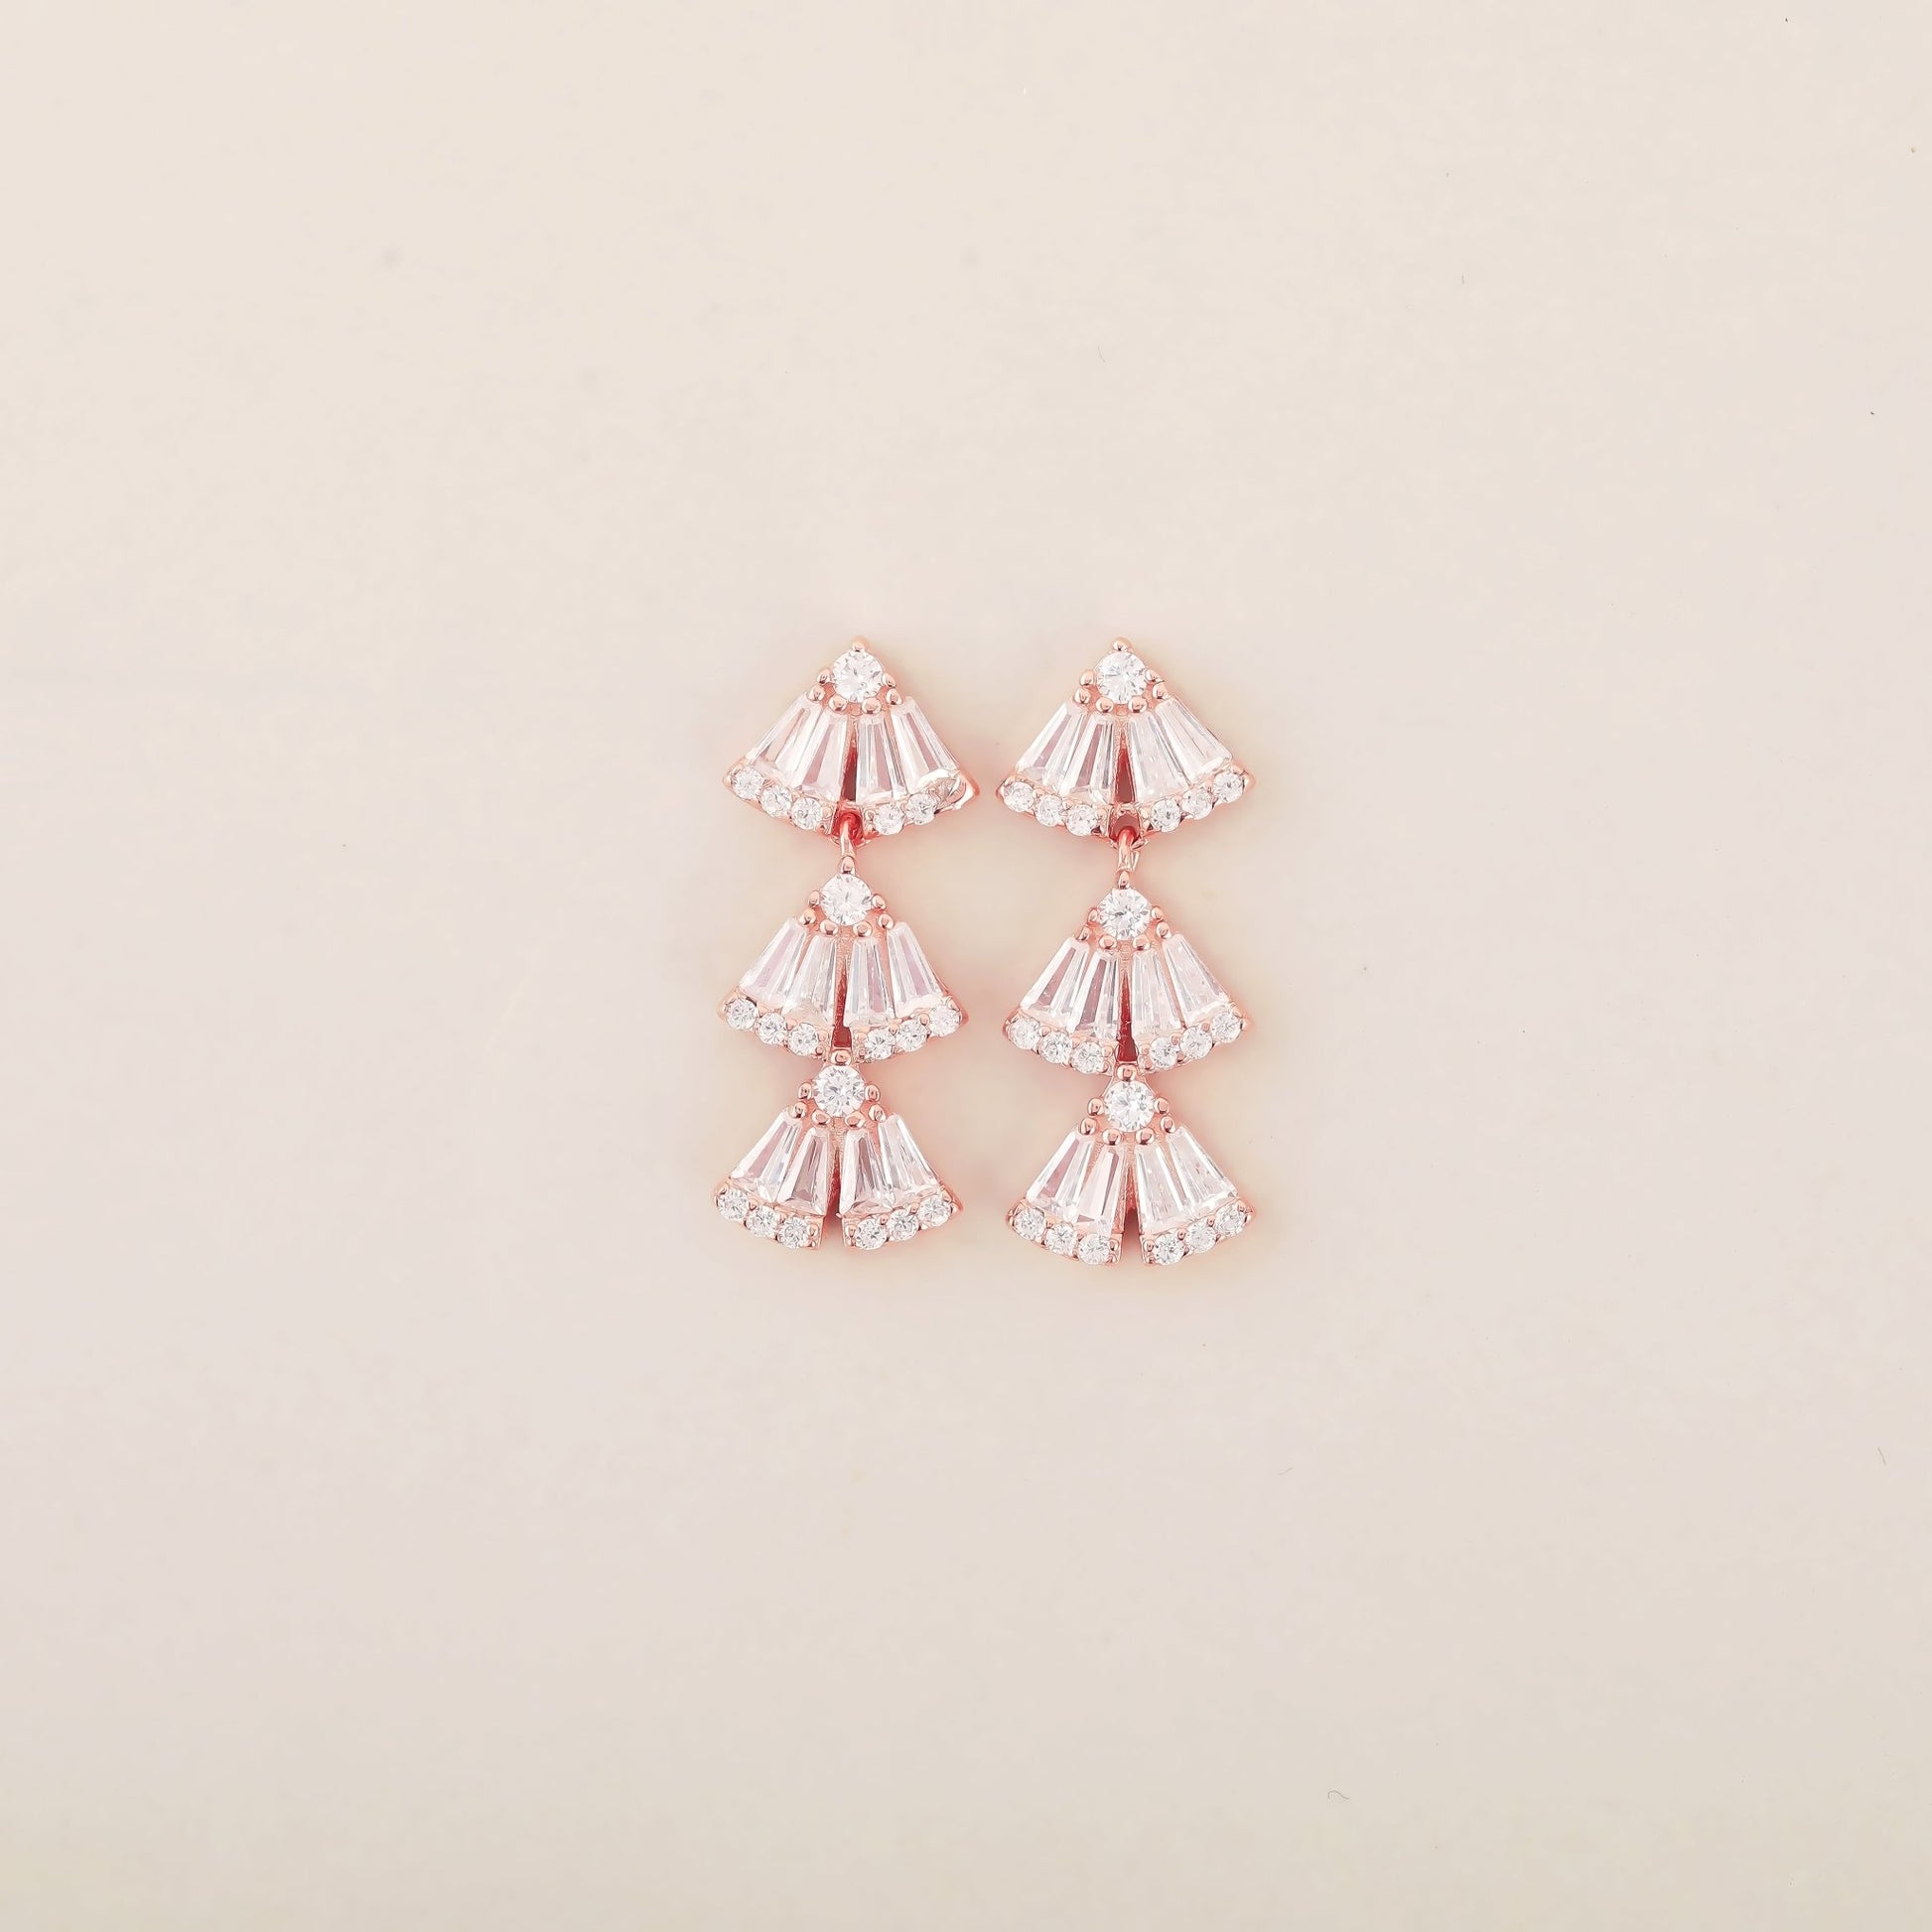 Baguette Brilliance: Rose Gold Earrings with Triangular Sterling Silver Studs Adorned with Baguette CZ Stones - Shining Silver.in